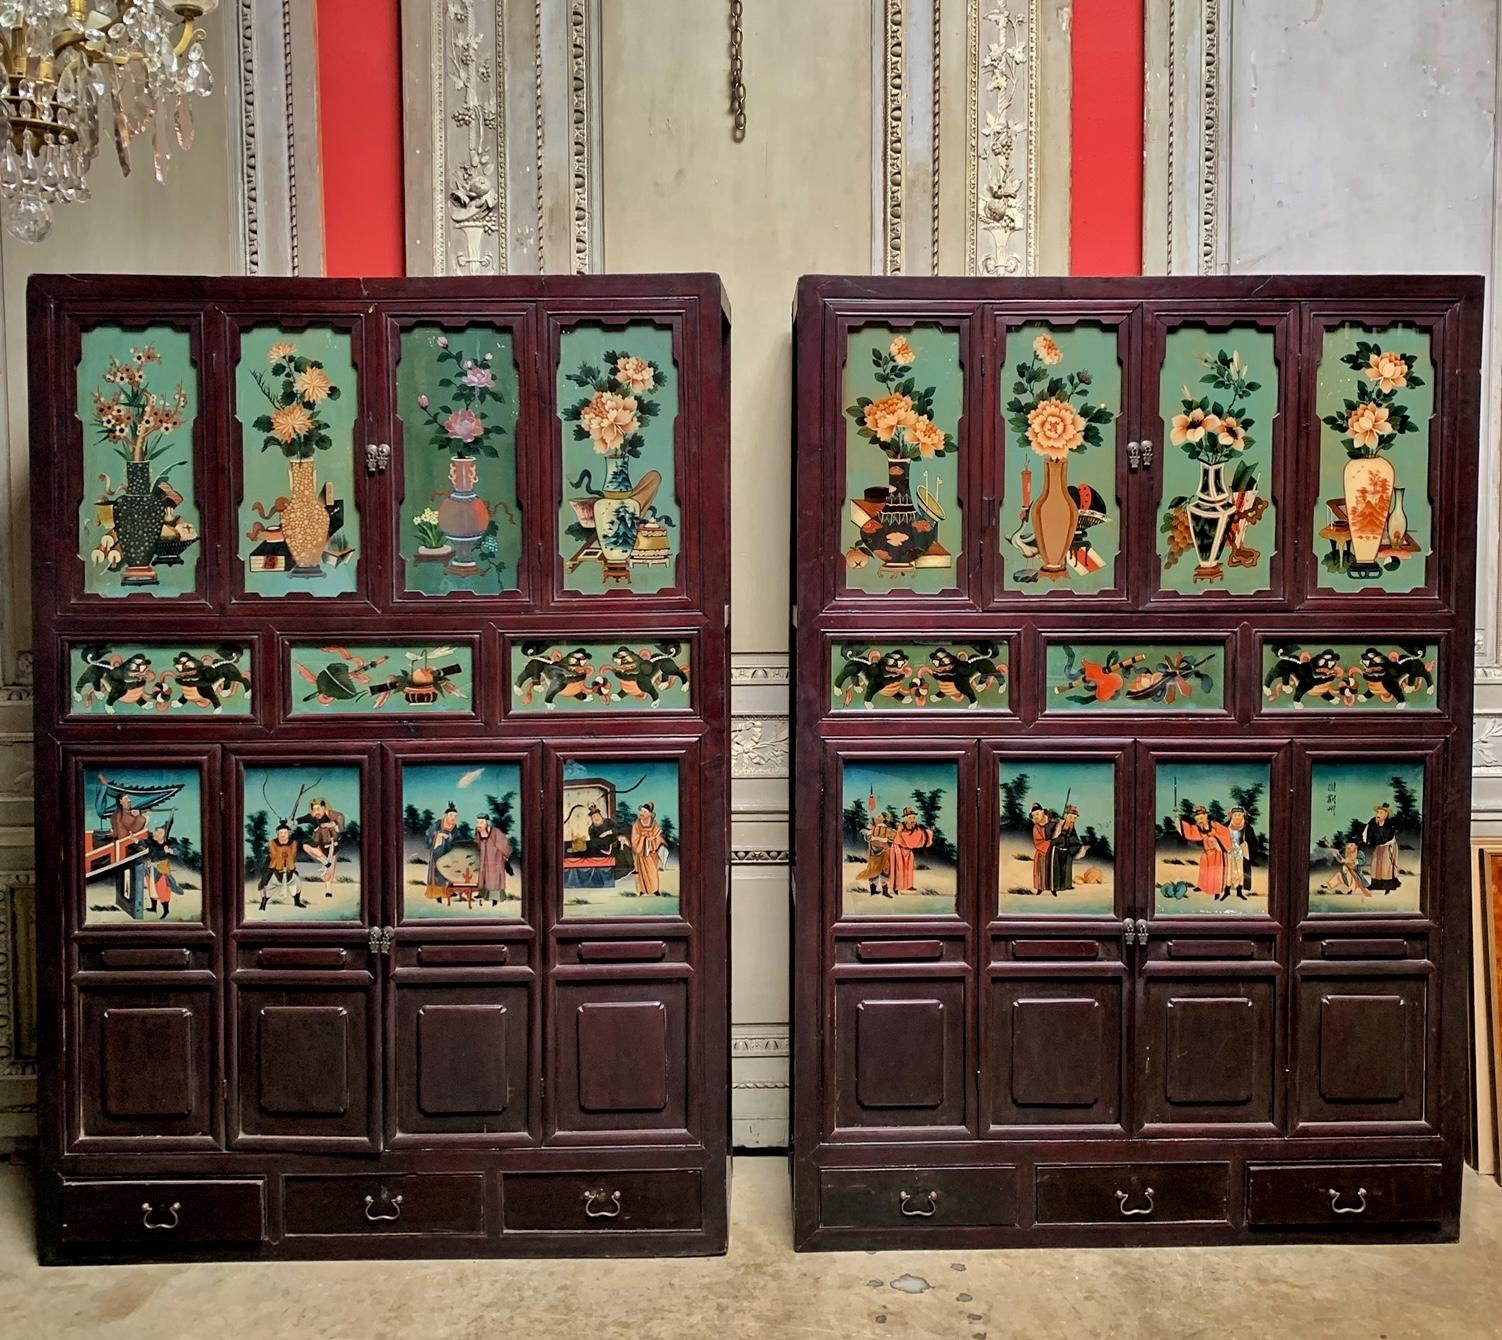 A pair of antique Chinese cabinets in elmwood with reverse painted glass planels depicting the four seasons. These early 20th century cabinets are highly decorative and colorful with a feel of chinoiserie.